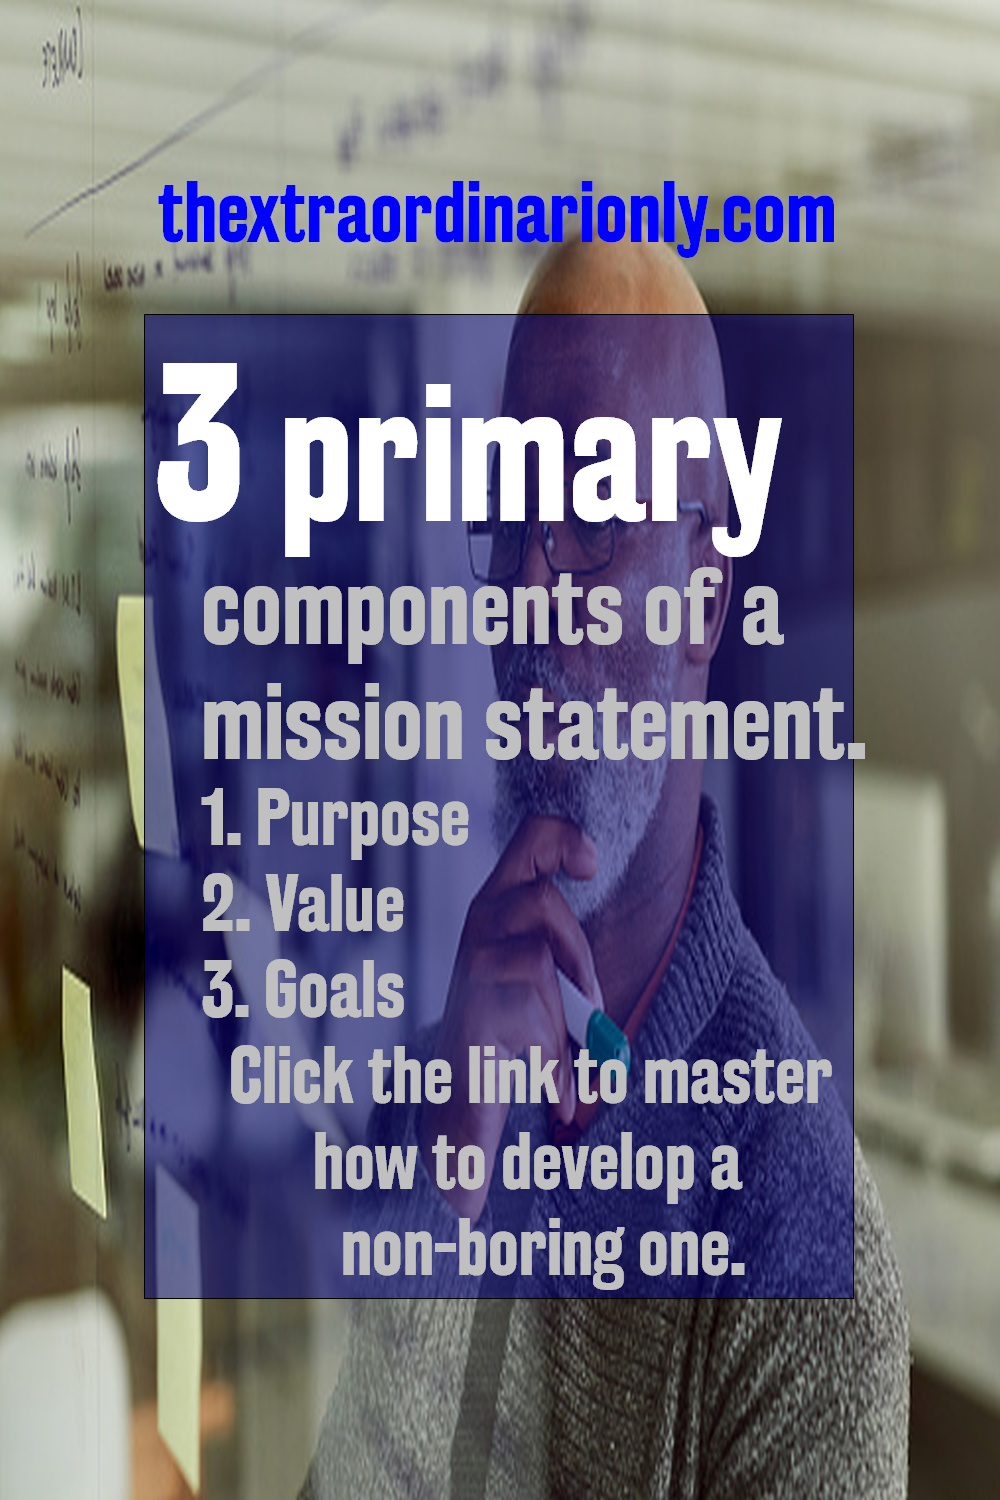 3 primary components of a mission statement